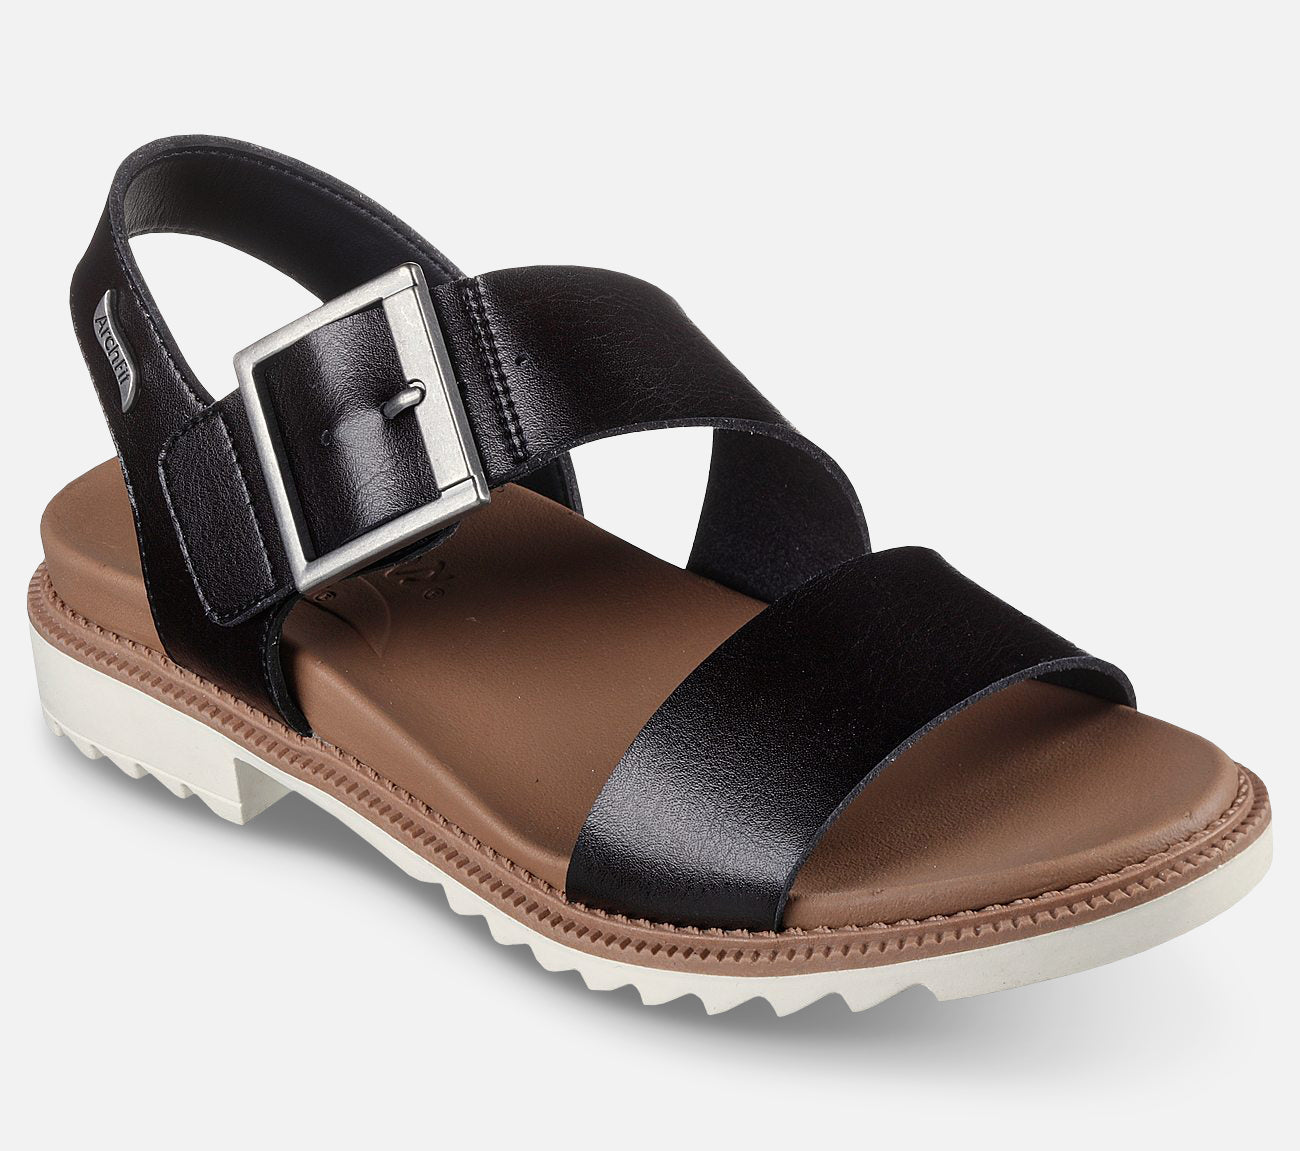 Arch Fit Lucy Sandal Skechers